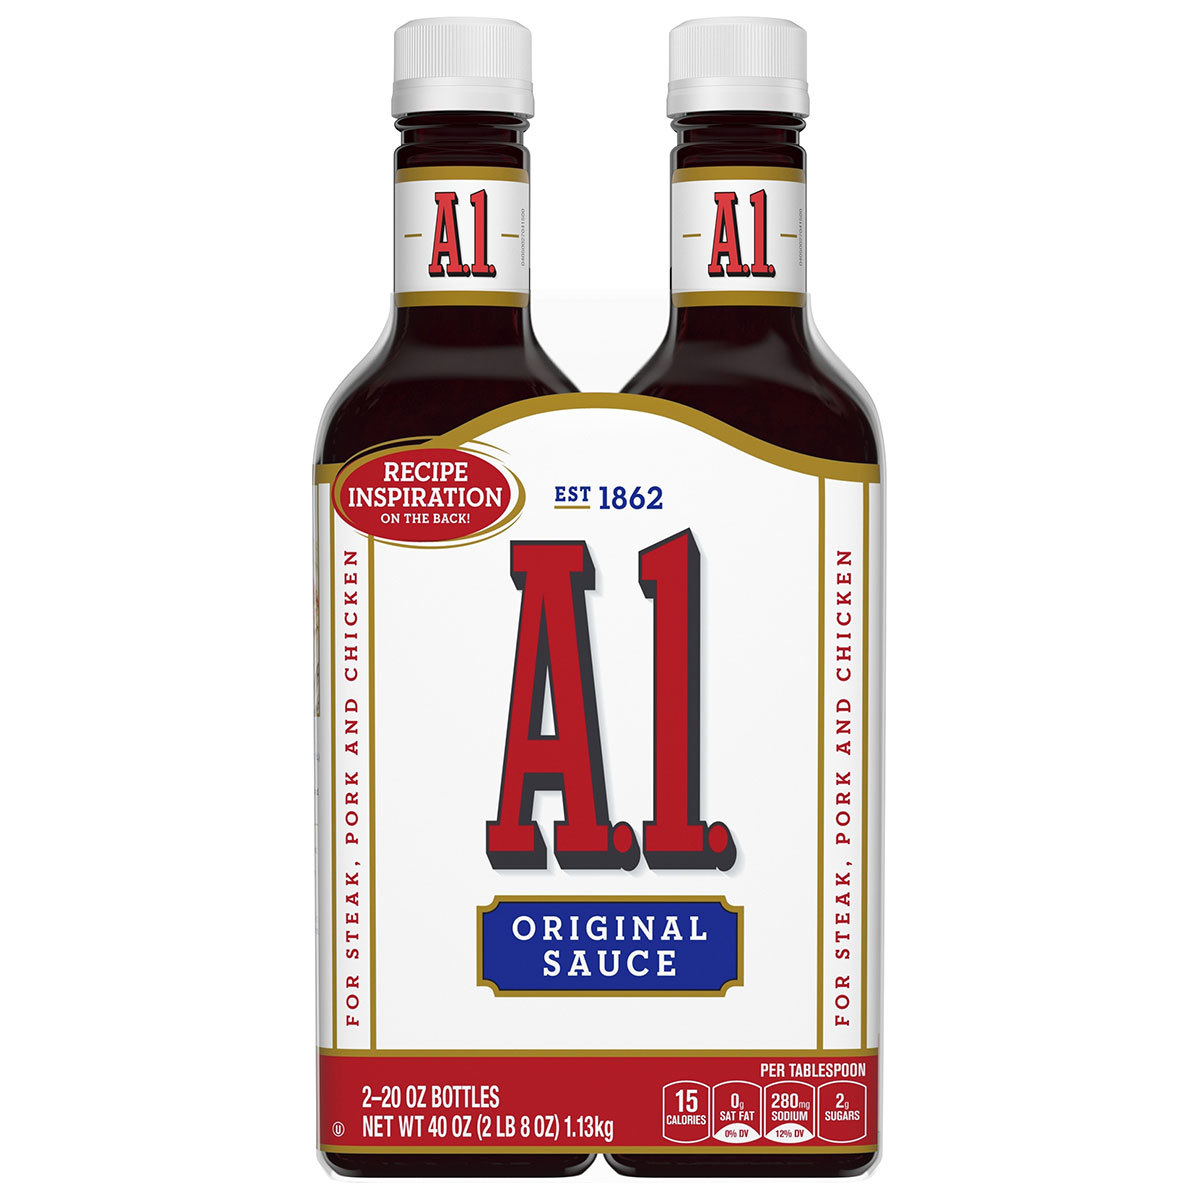 Image of two packaged bottles of A1 sauce on white background